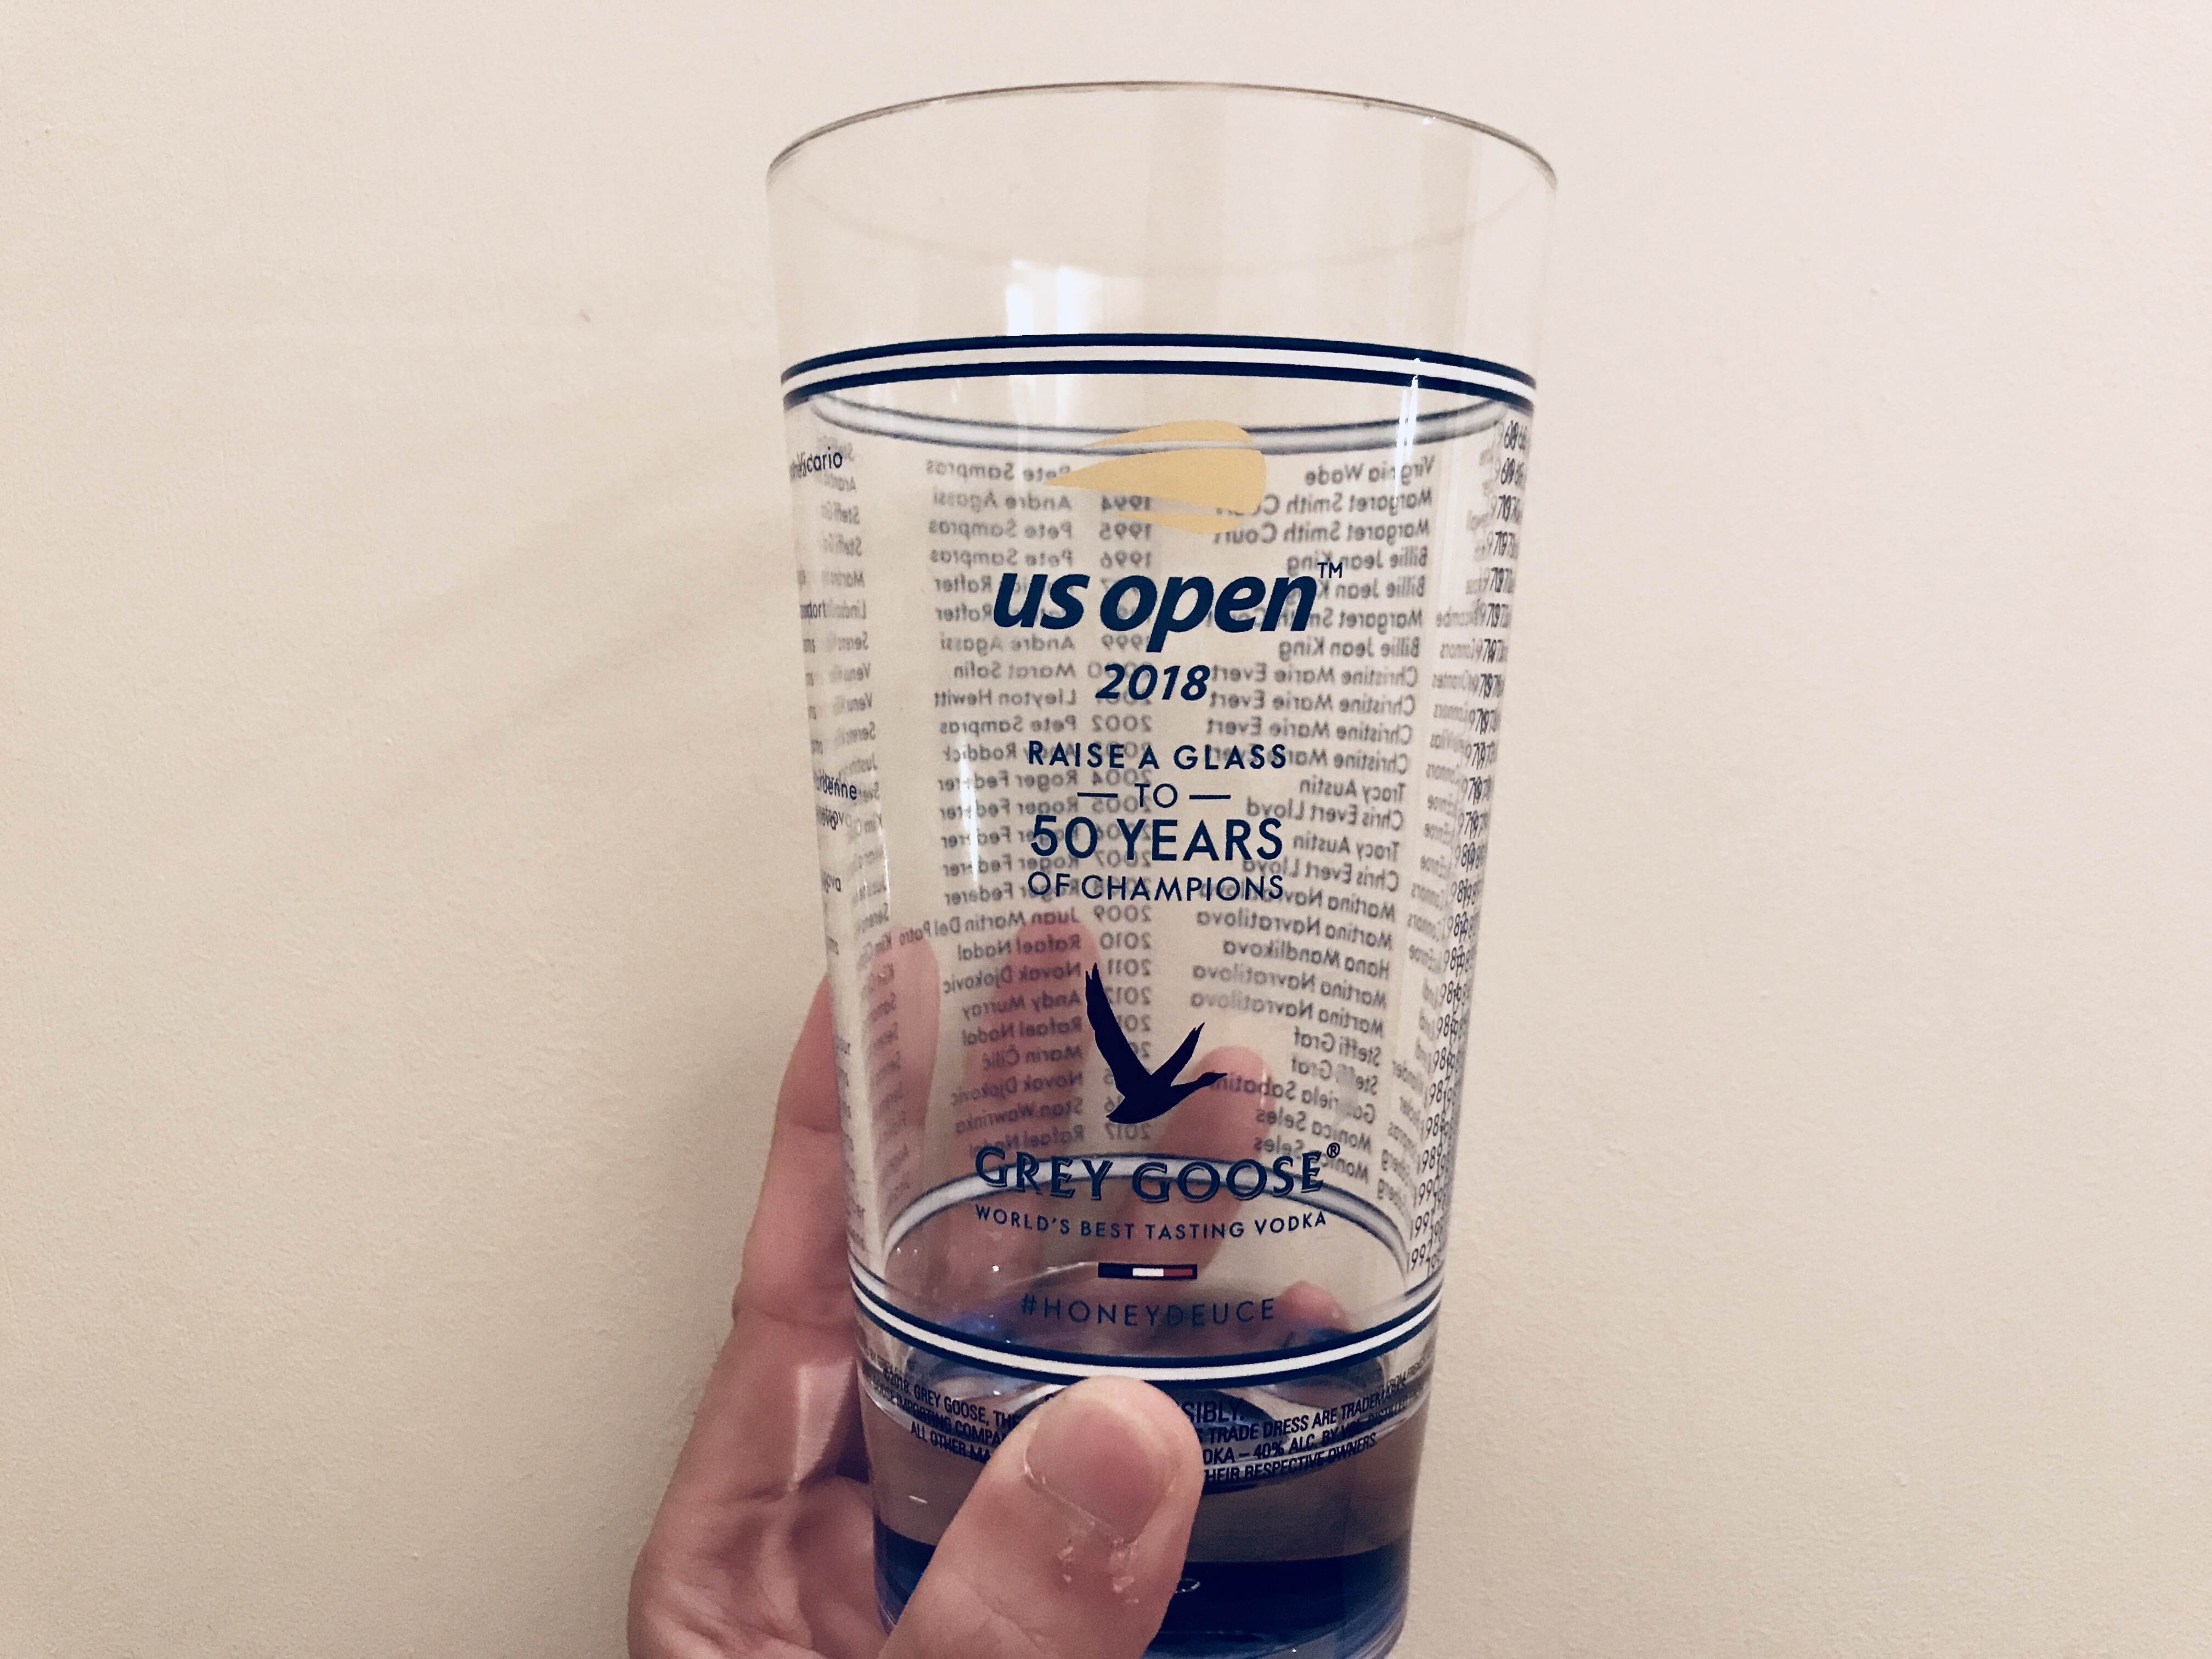 An empty U.S. Open souvenir "glass." (It's actually hard plastic.) Image by Chris Dong